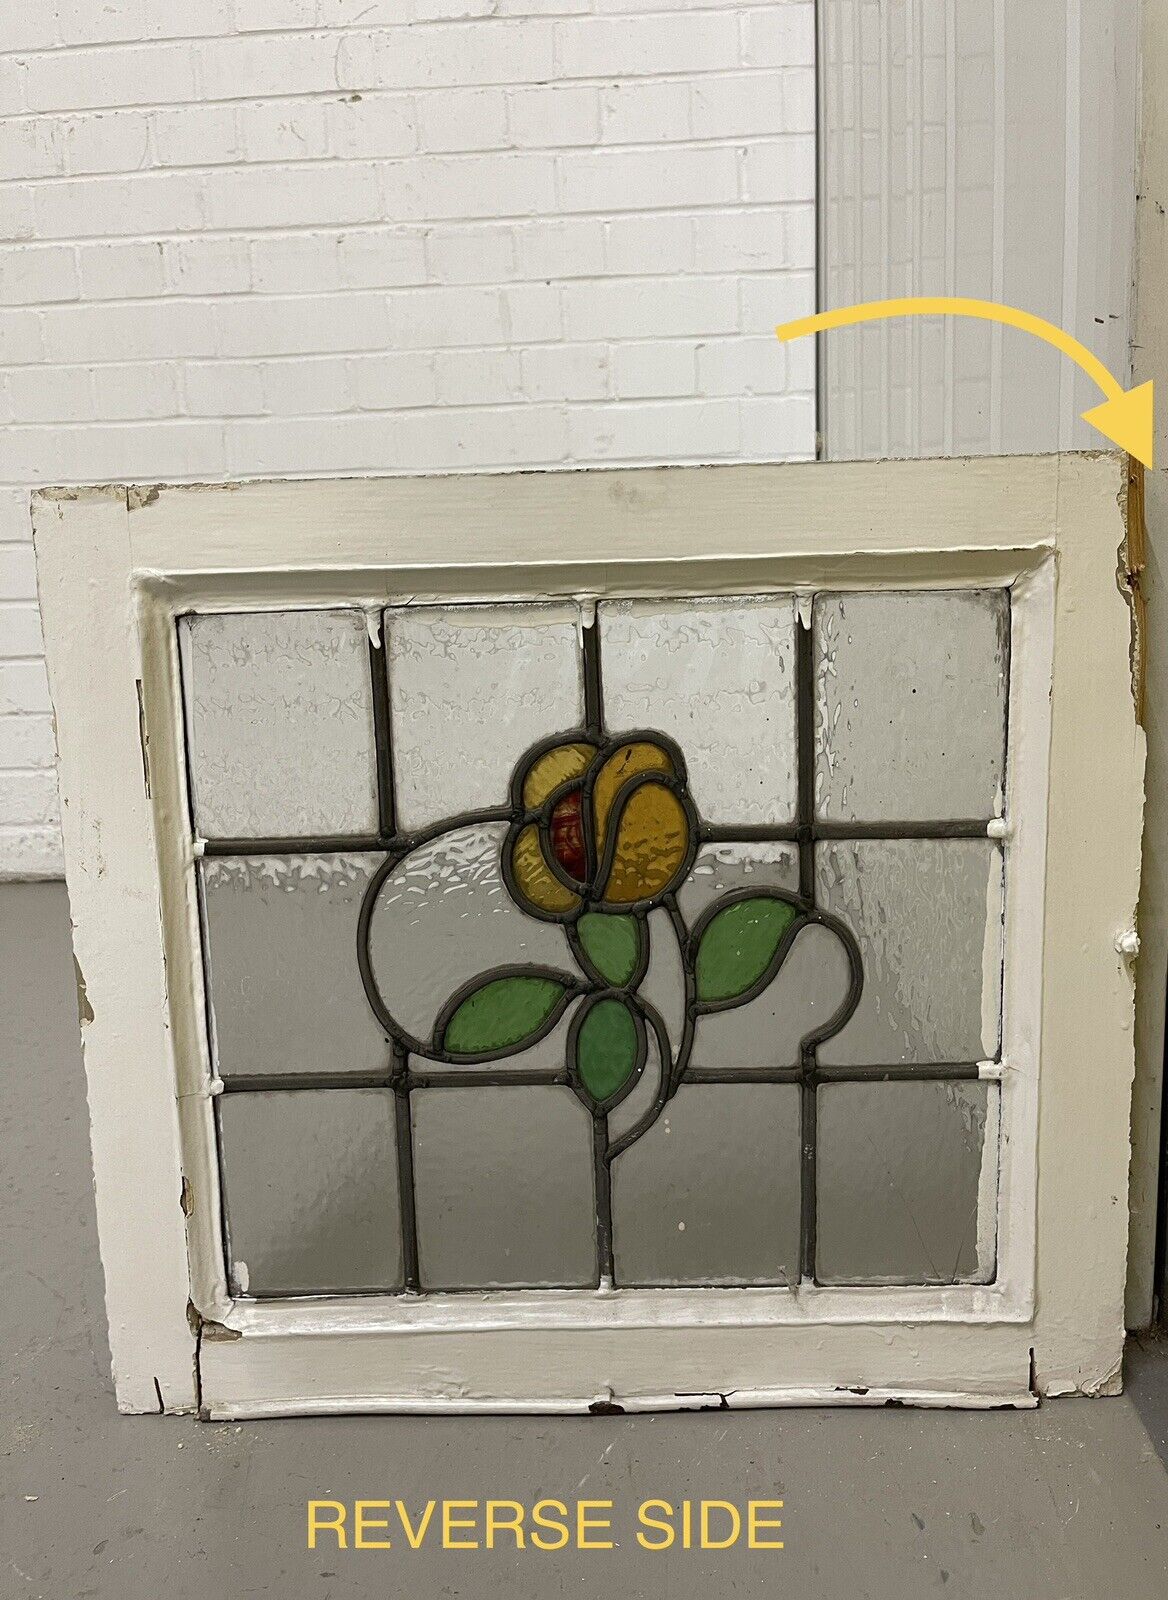 Reclaimed Floral Leaded Light Stained Glass Art Nouveau Window Panel 505 x 455mm